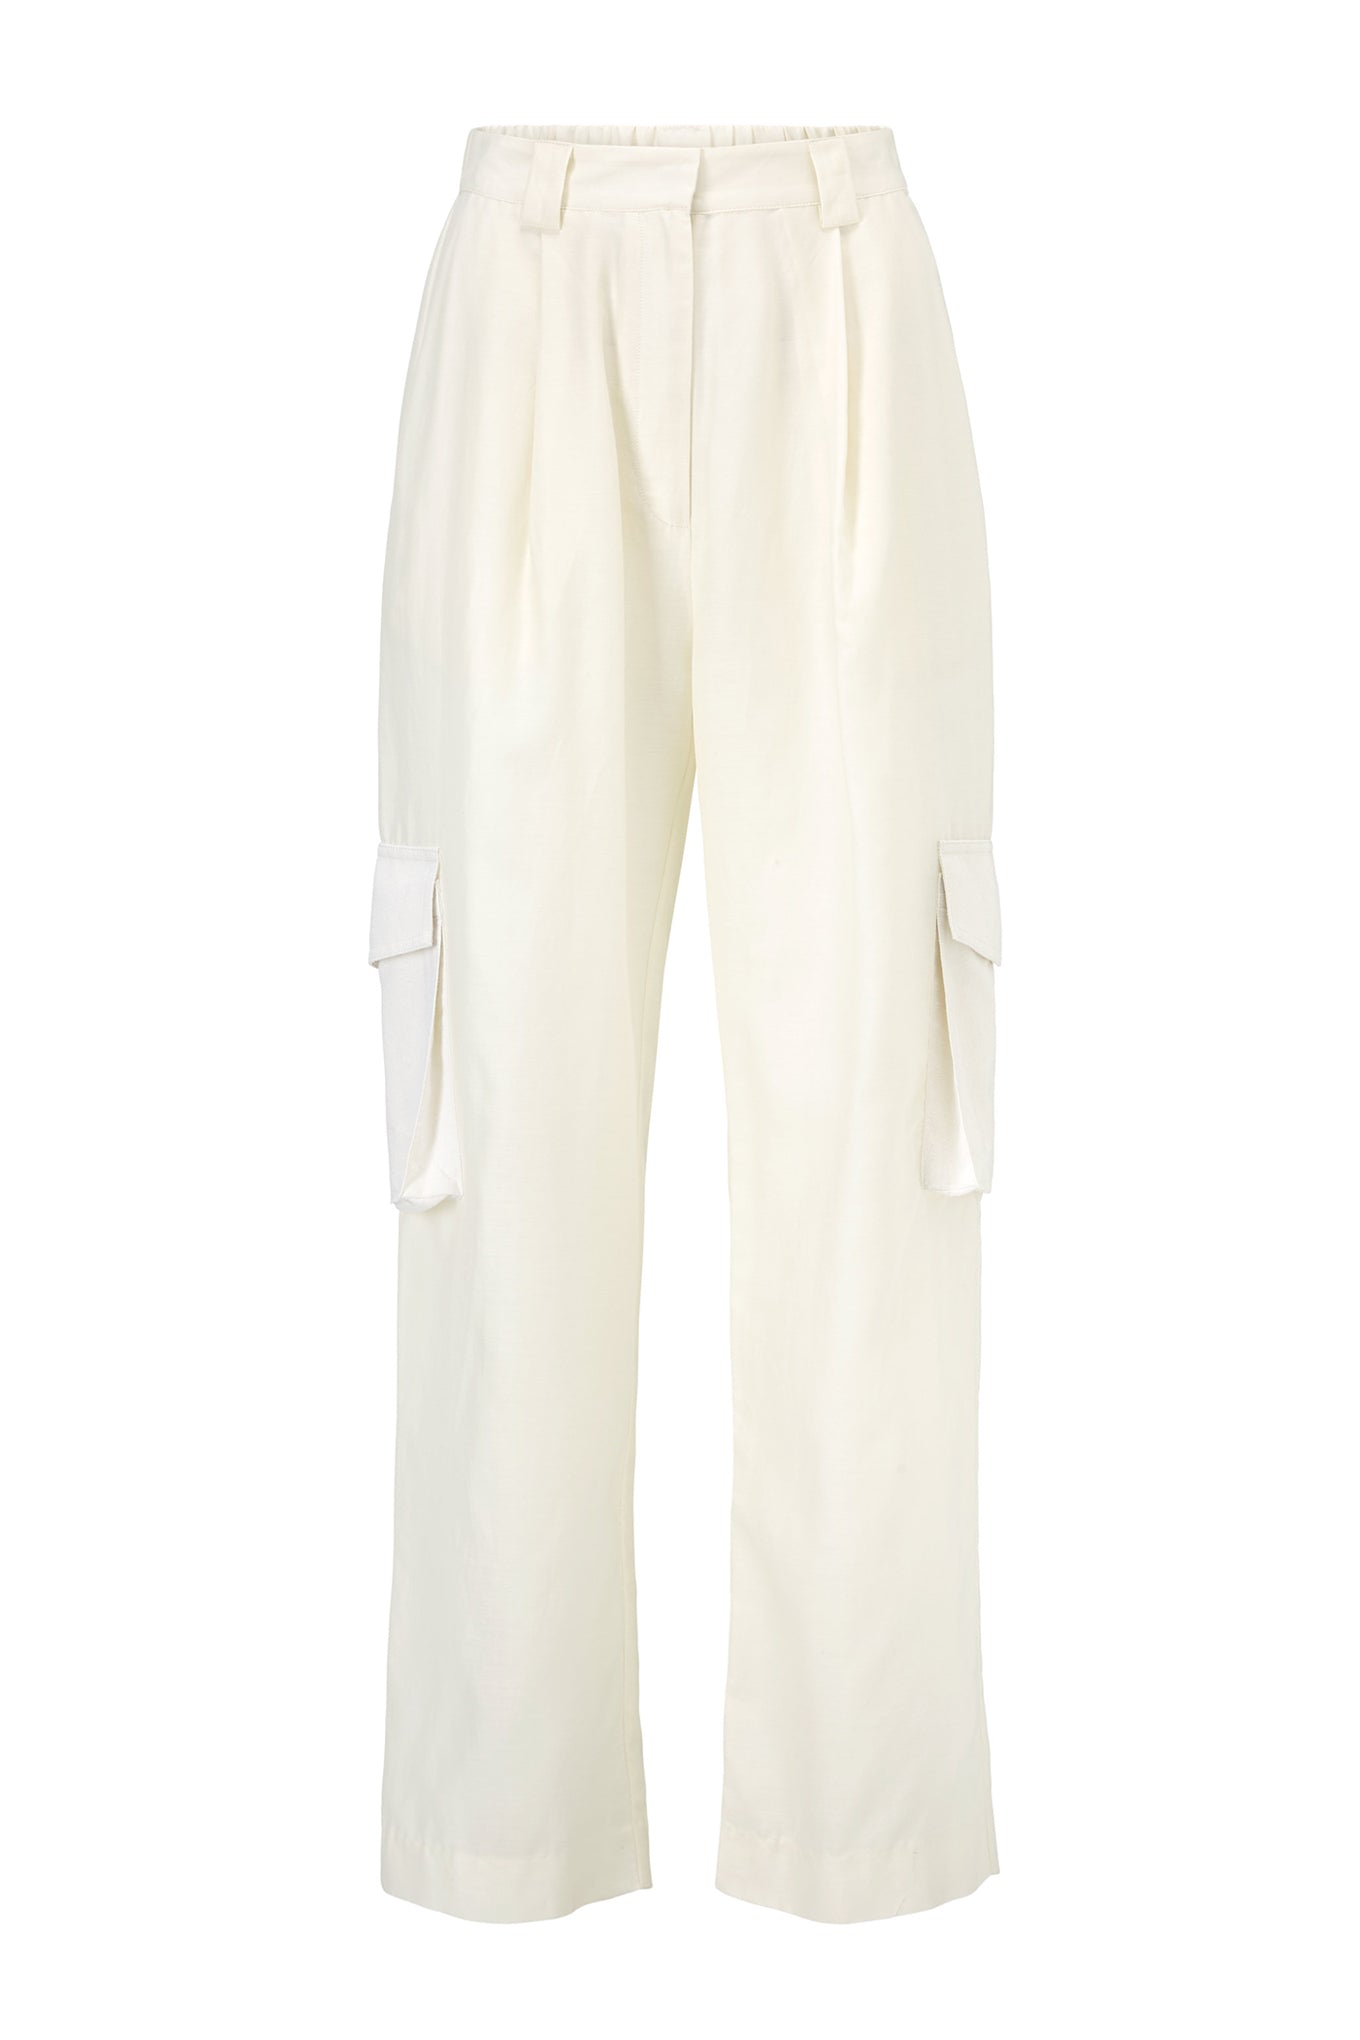 Buy Tapsar Thead Cotton Silk Pant (XL 30-32, Off White) at Amazon.in